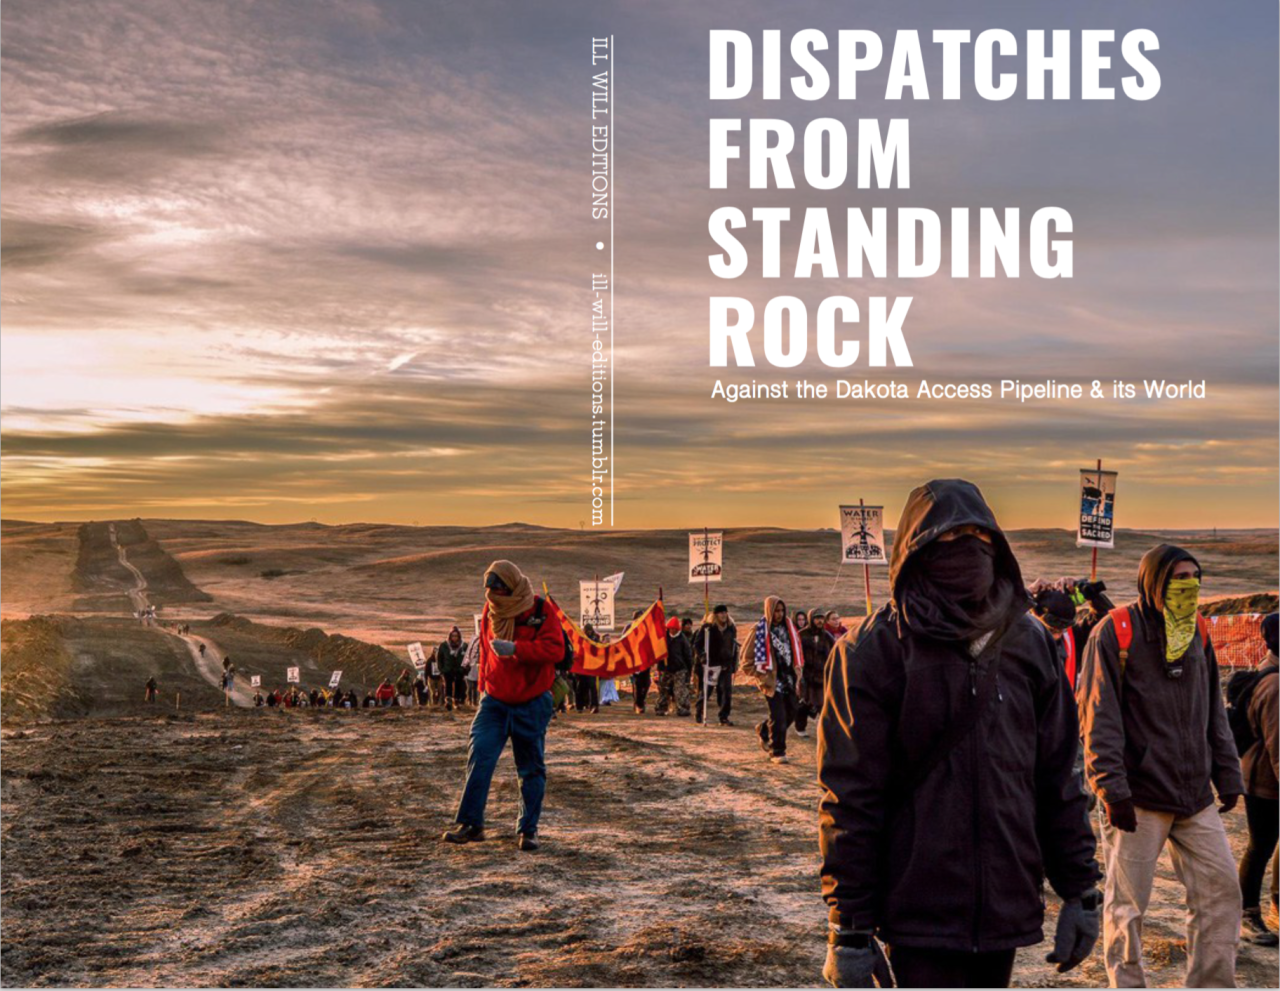 DISPATCHES FROM STANDING ROCK (2016)These five texts appeared on various public websites over the past few weeks, each marking an intensification of the struggle against the Dakota Access Pipeline. We hope this zine will serve to extend the...